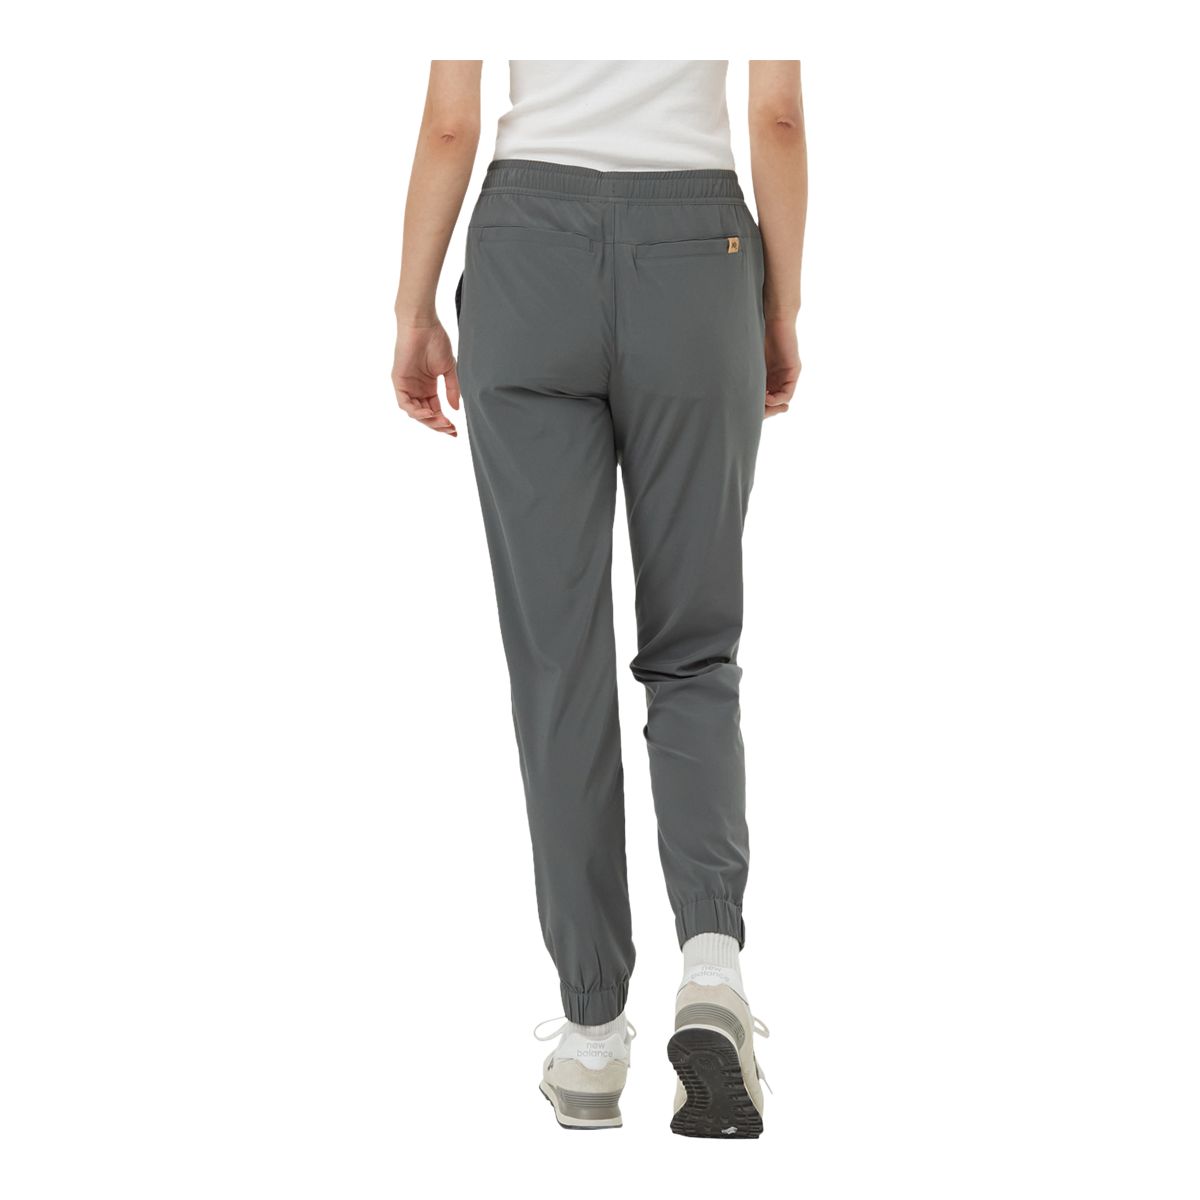 Tentree Women's InMotion Pacific Jogger Pants